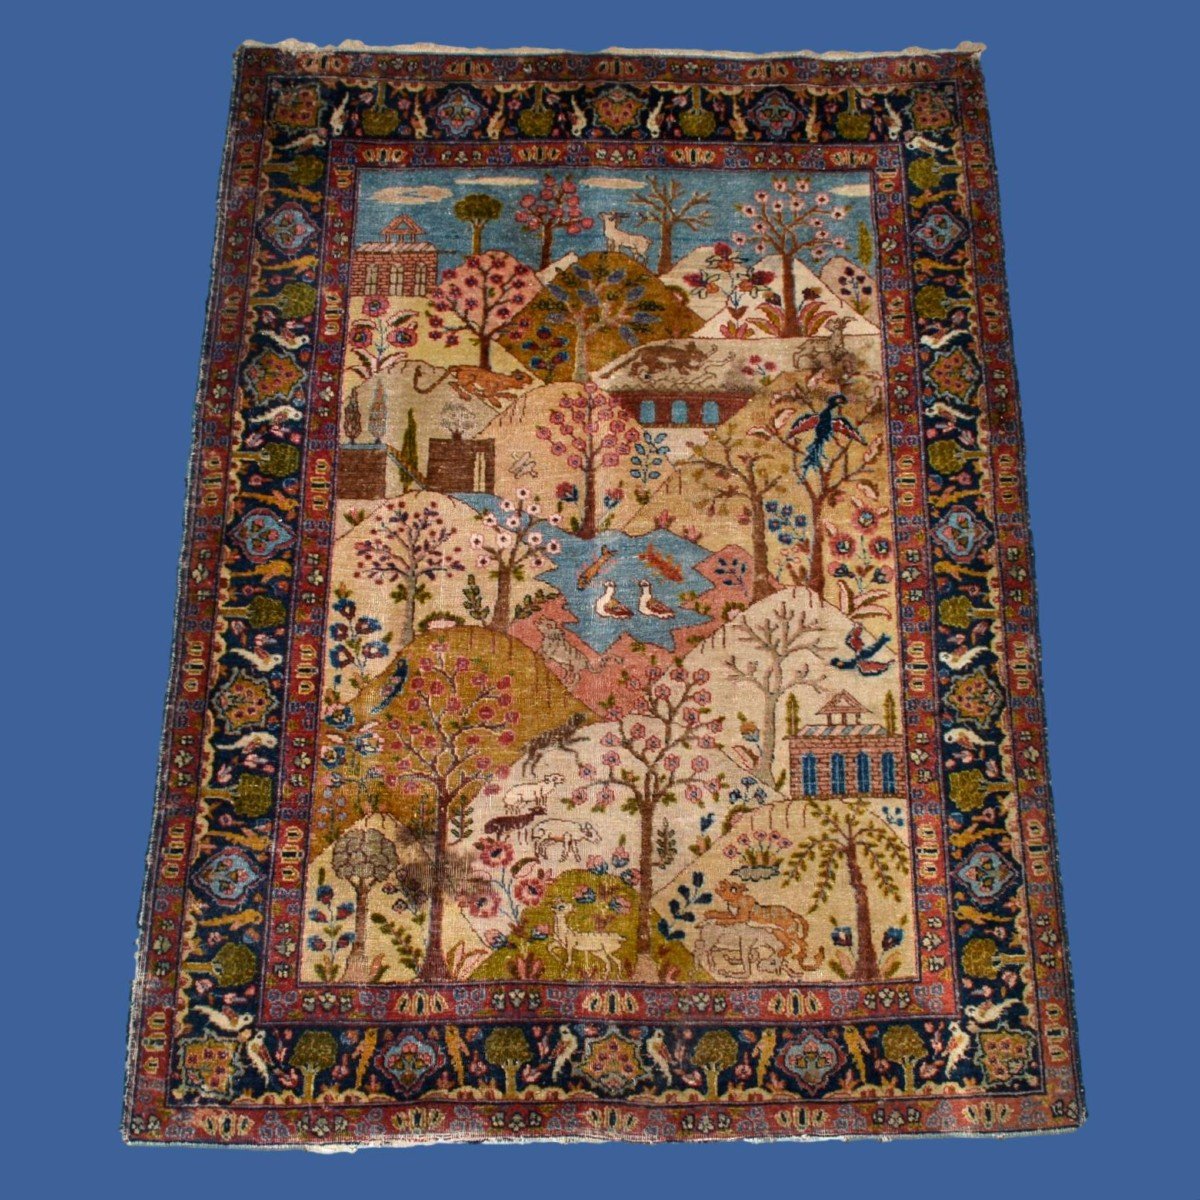 Painting Rug, Old Tabriz, 142 Cm X 188 Cm, Hand-knotted Wool In Persia, Iran Circa 1880 - 1900-photo-8